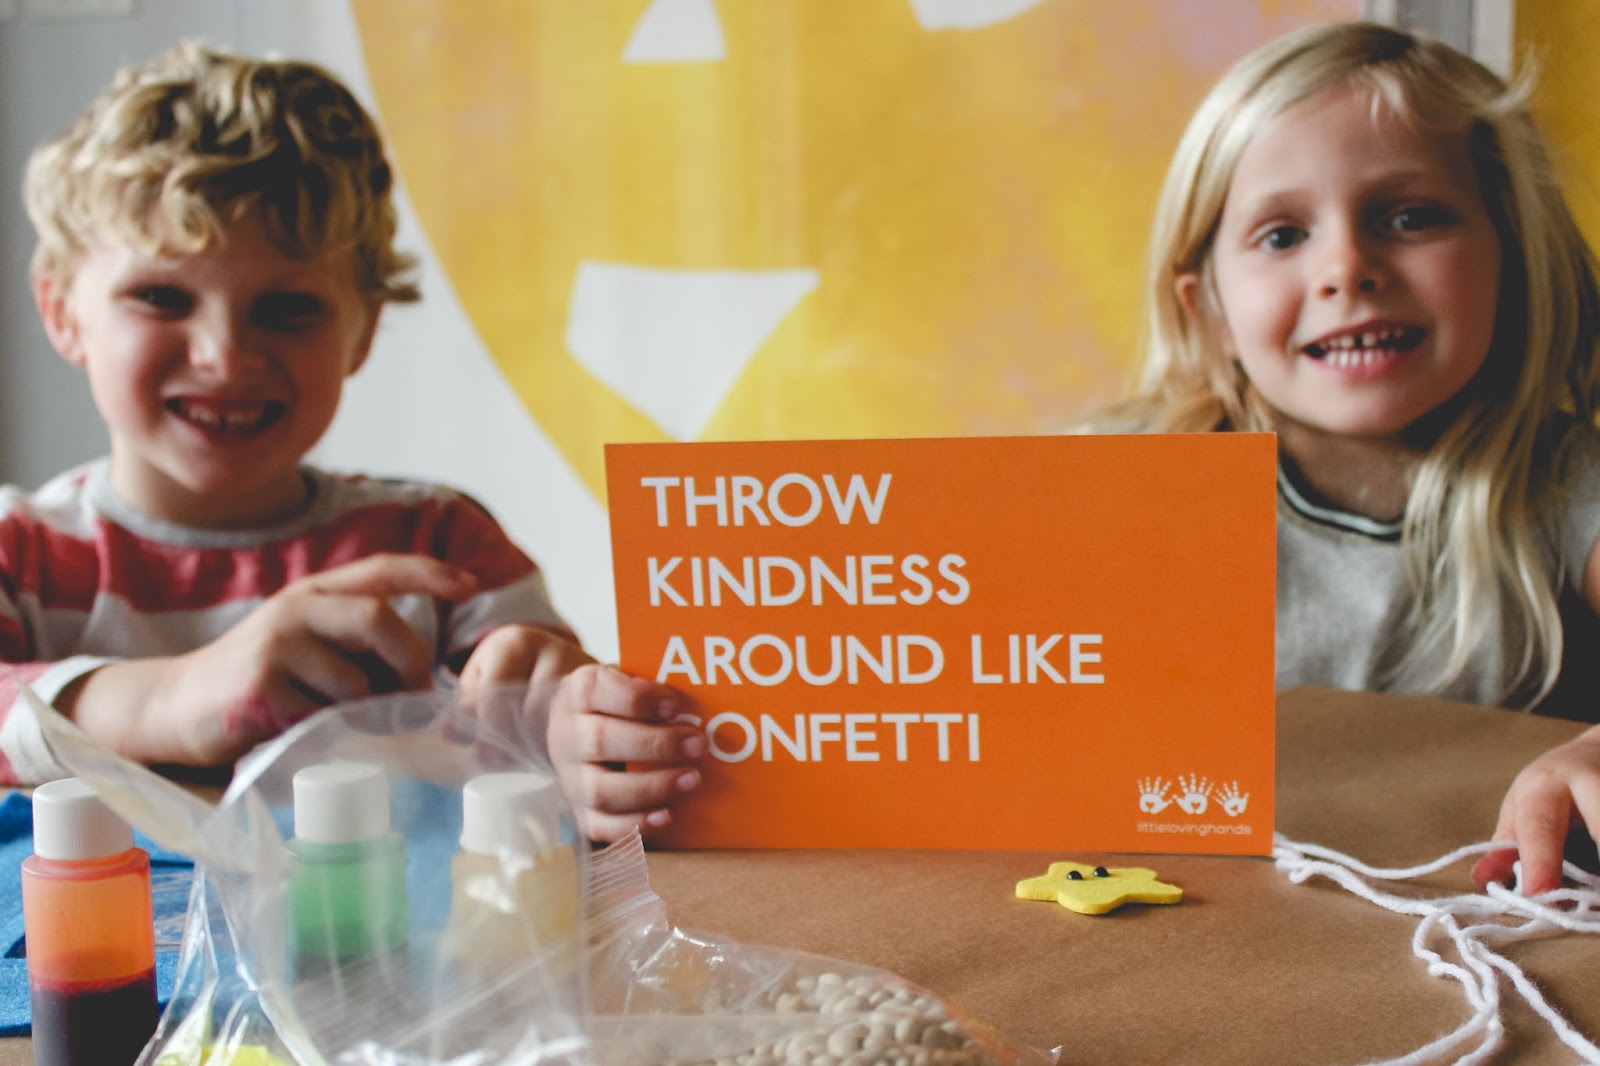 LITTLE LOVING HANDS' CRAFT KITS FOR A CAUSE IS A GREAT WAY FOR